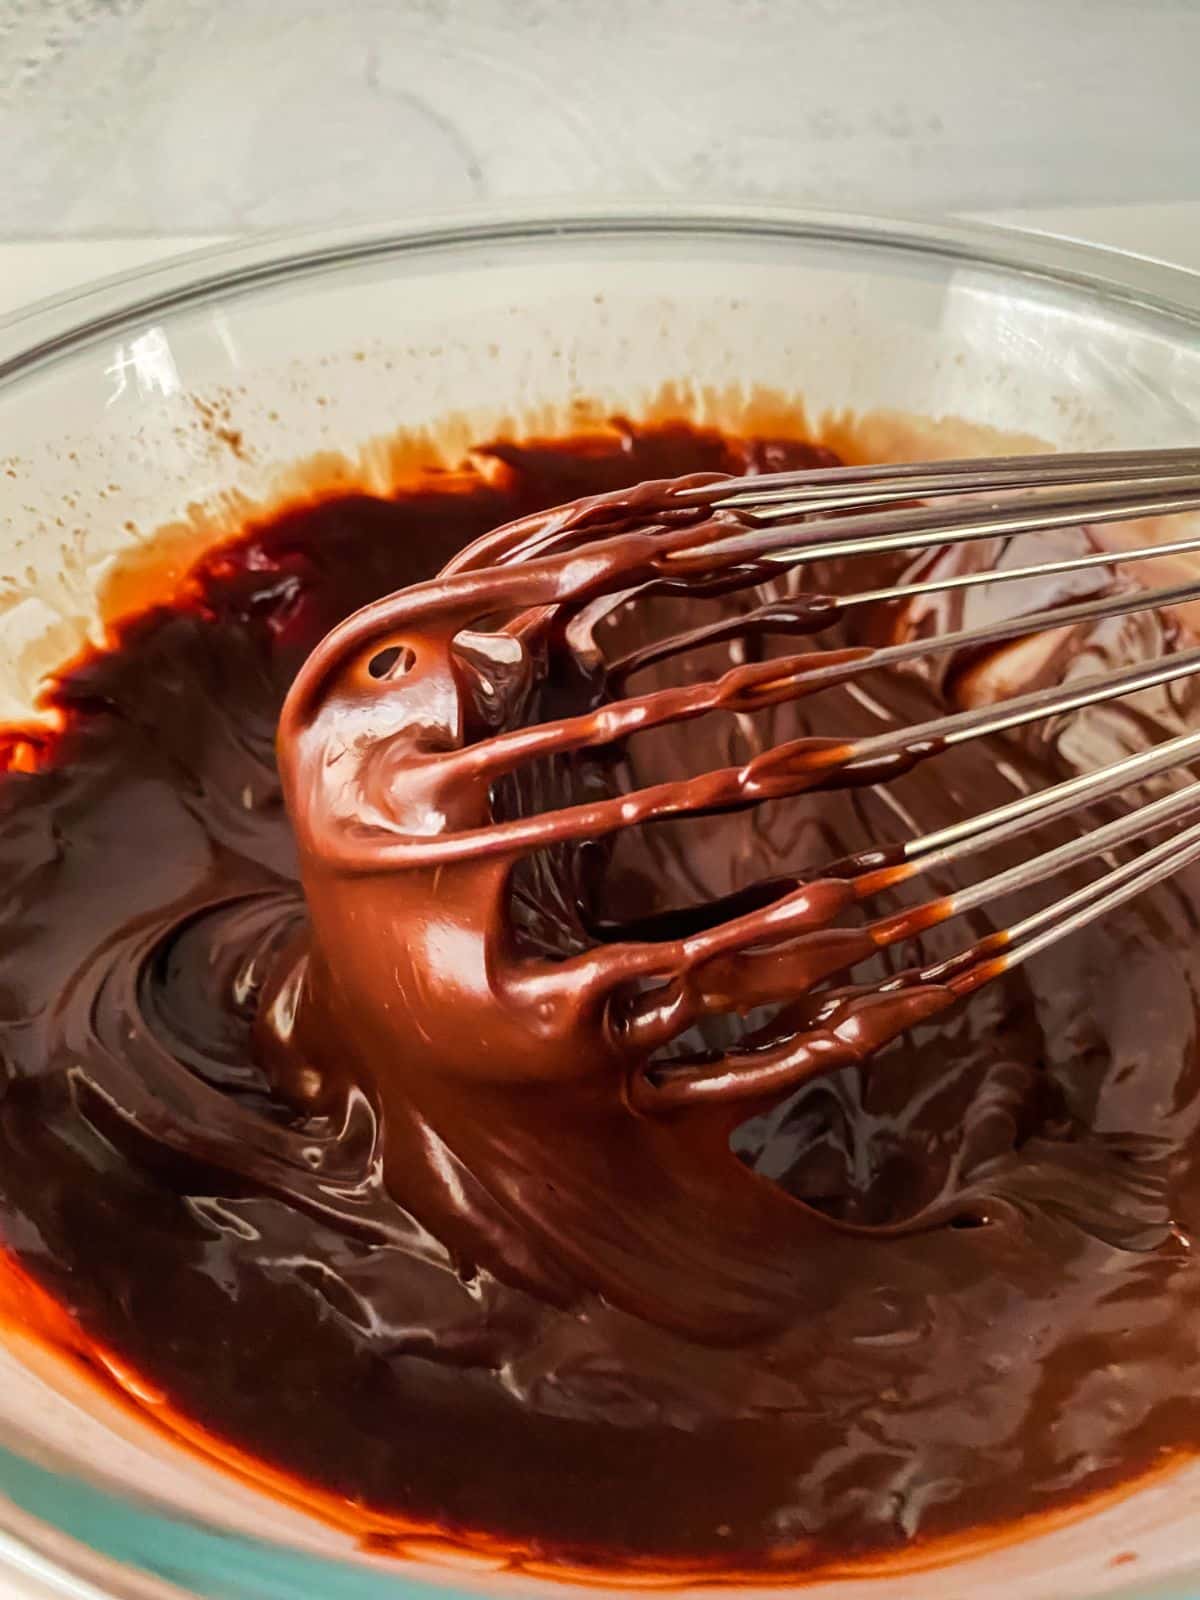 whisk held above bowl of chocolate ganache